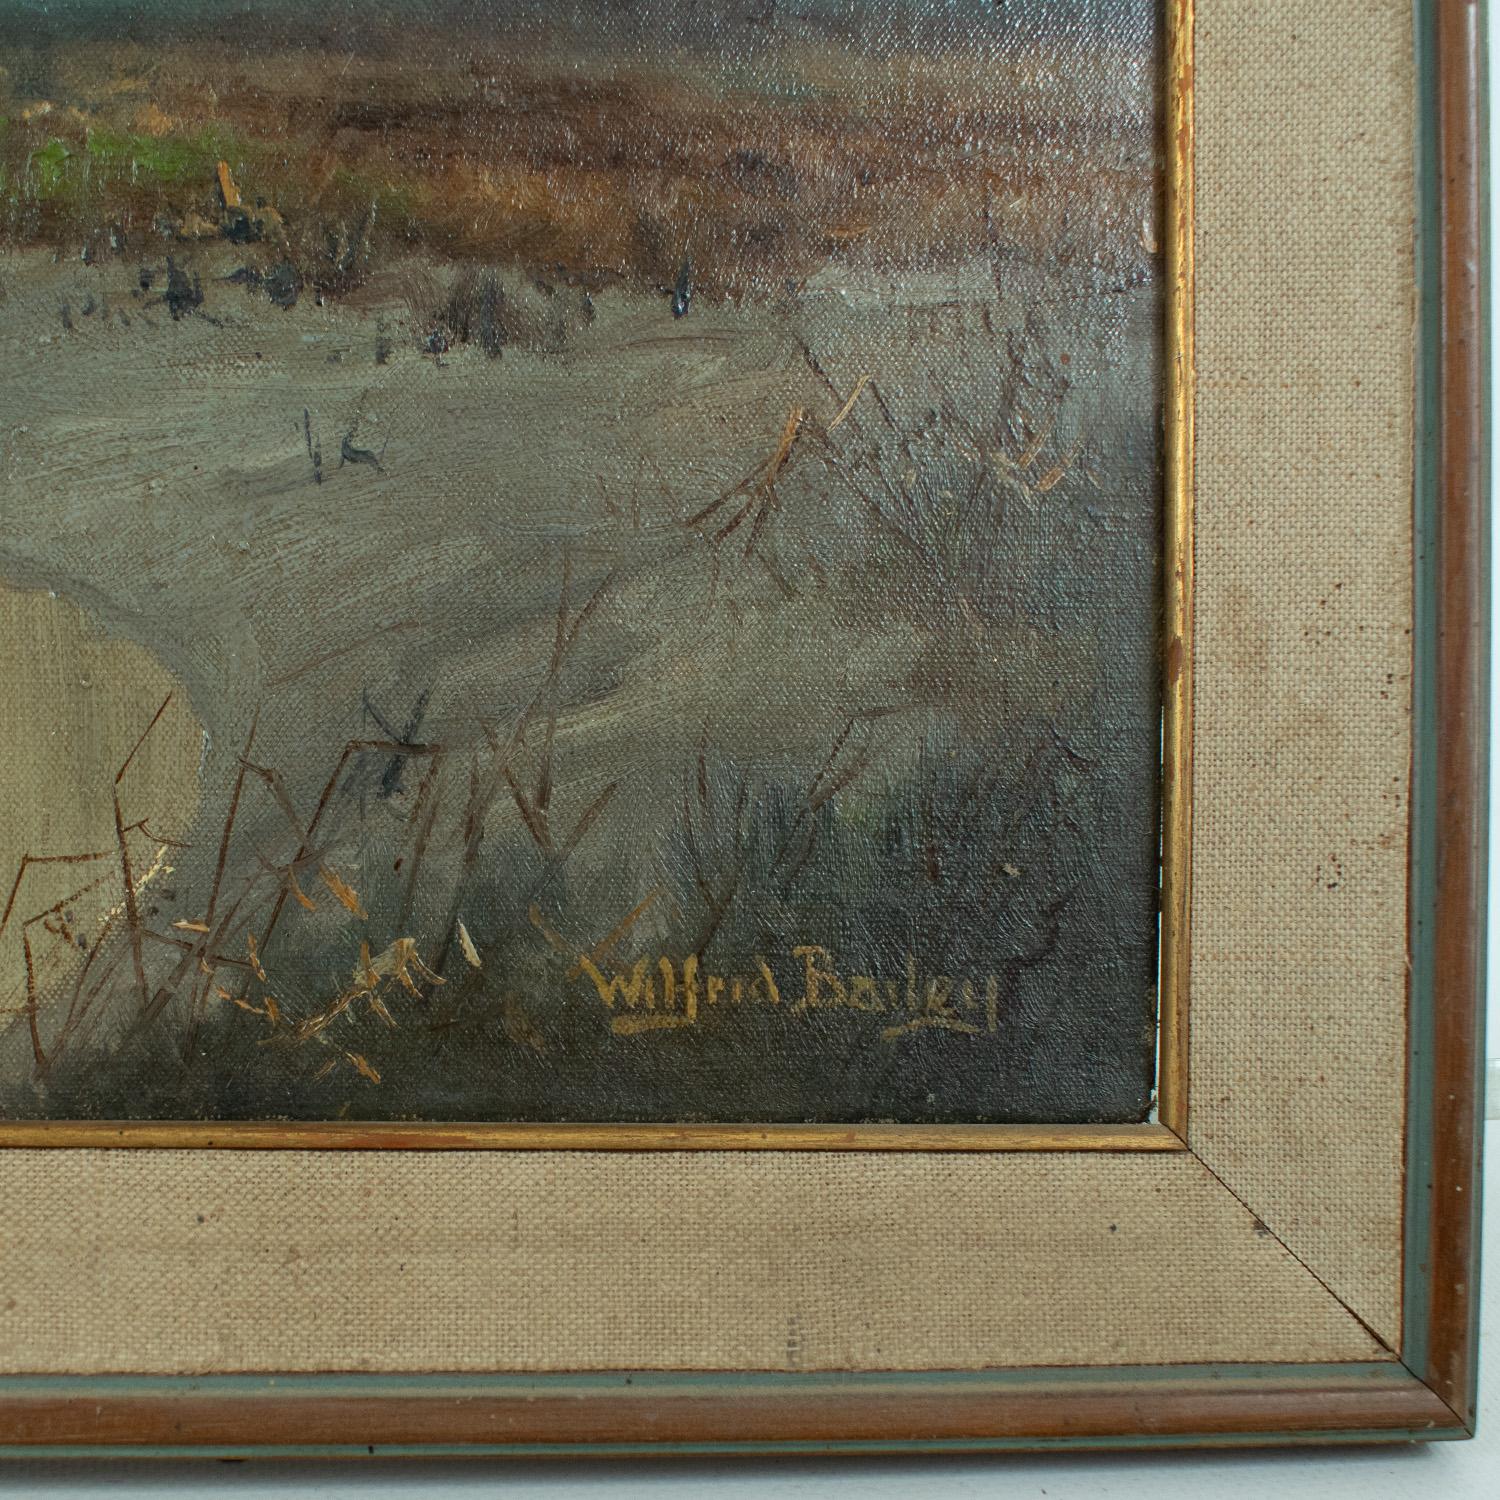 Canvas BAILEY Wilfred fl. 1942-1954 - Teal over a Widening Dyke, oil on canvas, signed For Sale